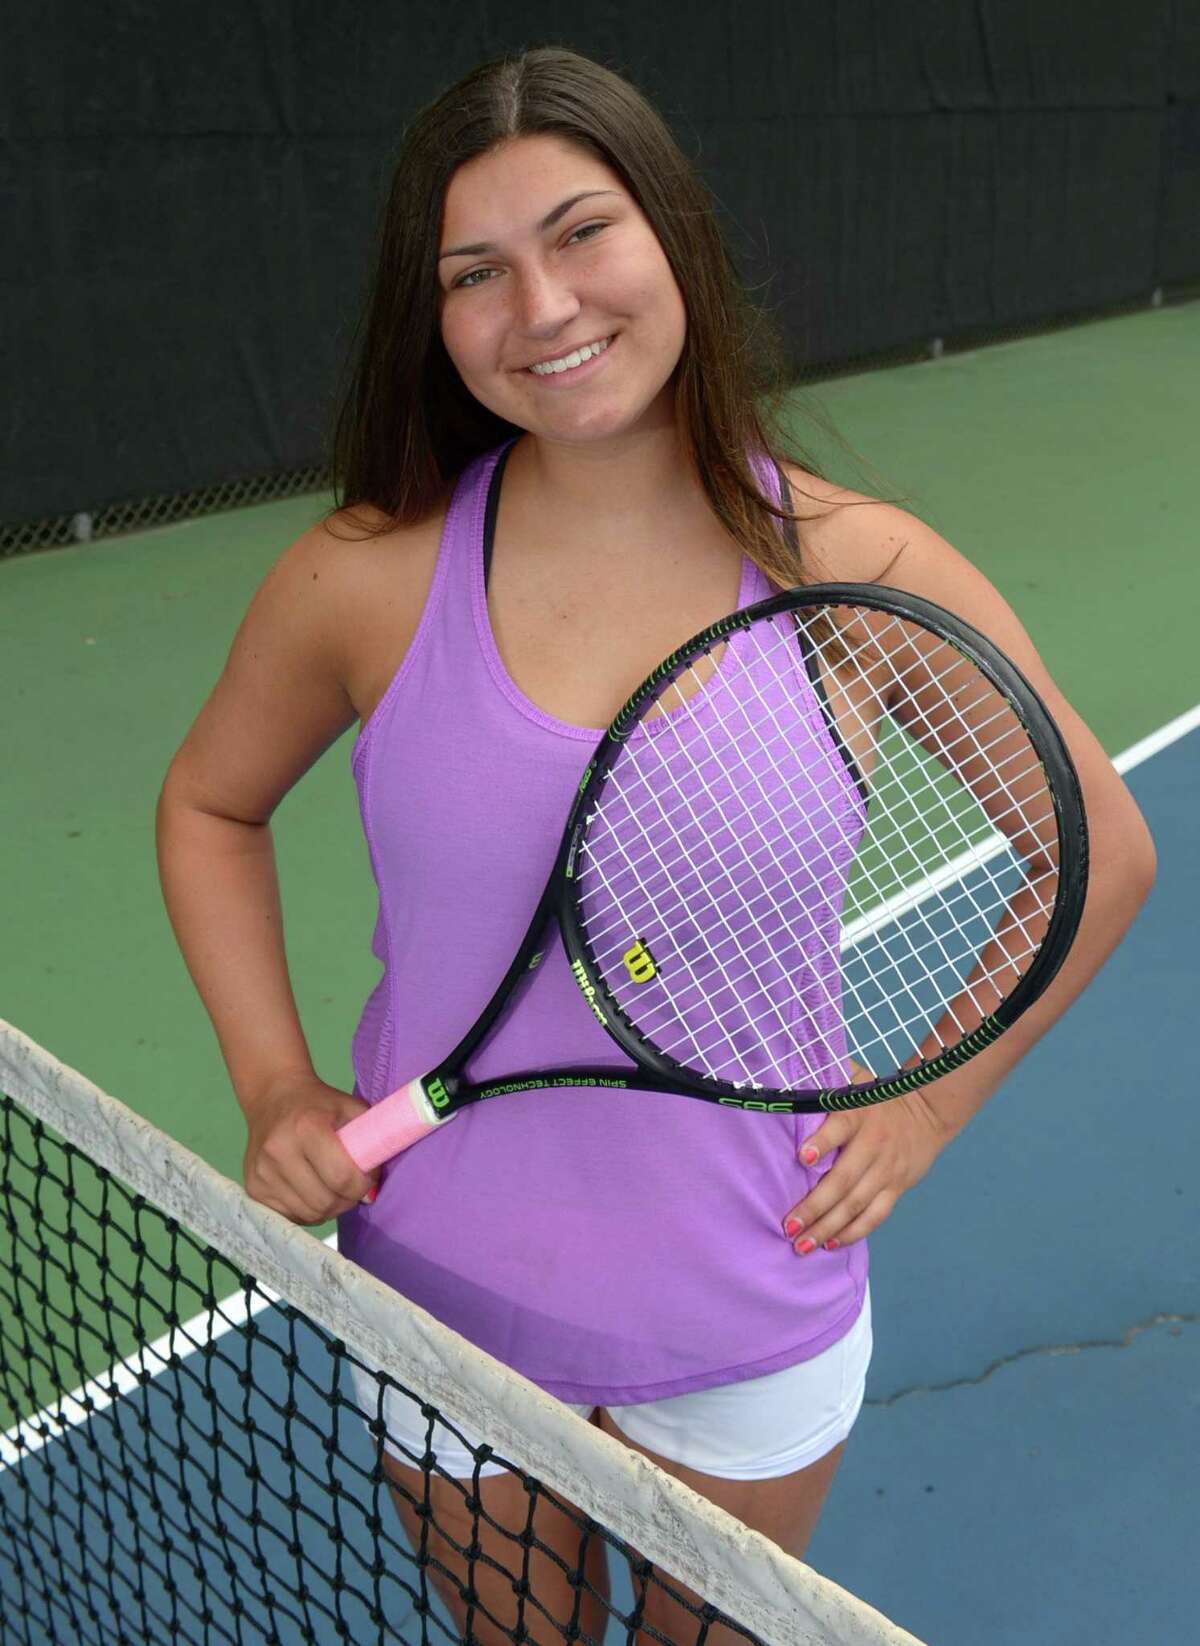 Weston High graduate Cayla Koch, Hearst All-Stars Girls Tennis Player of the Year, Wednesday, July 12, 2017, at the Weston High School tennis courts in Weston, Conn.